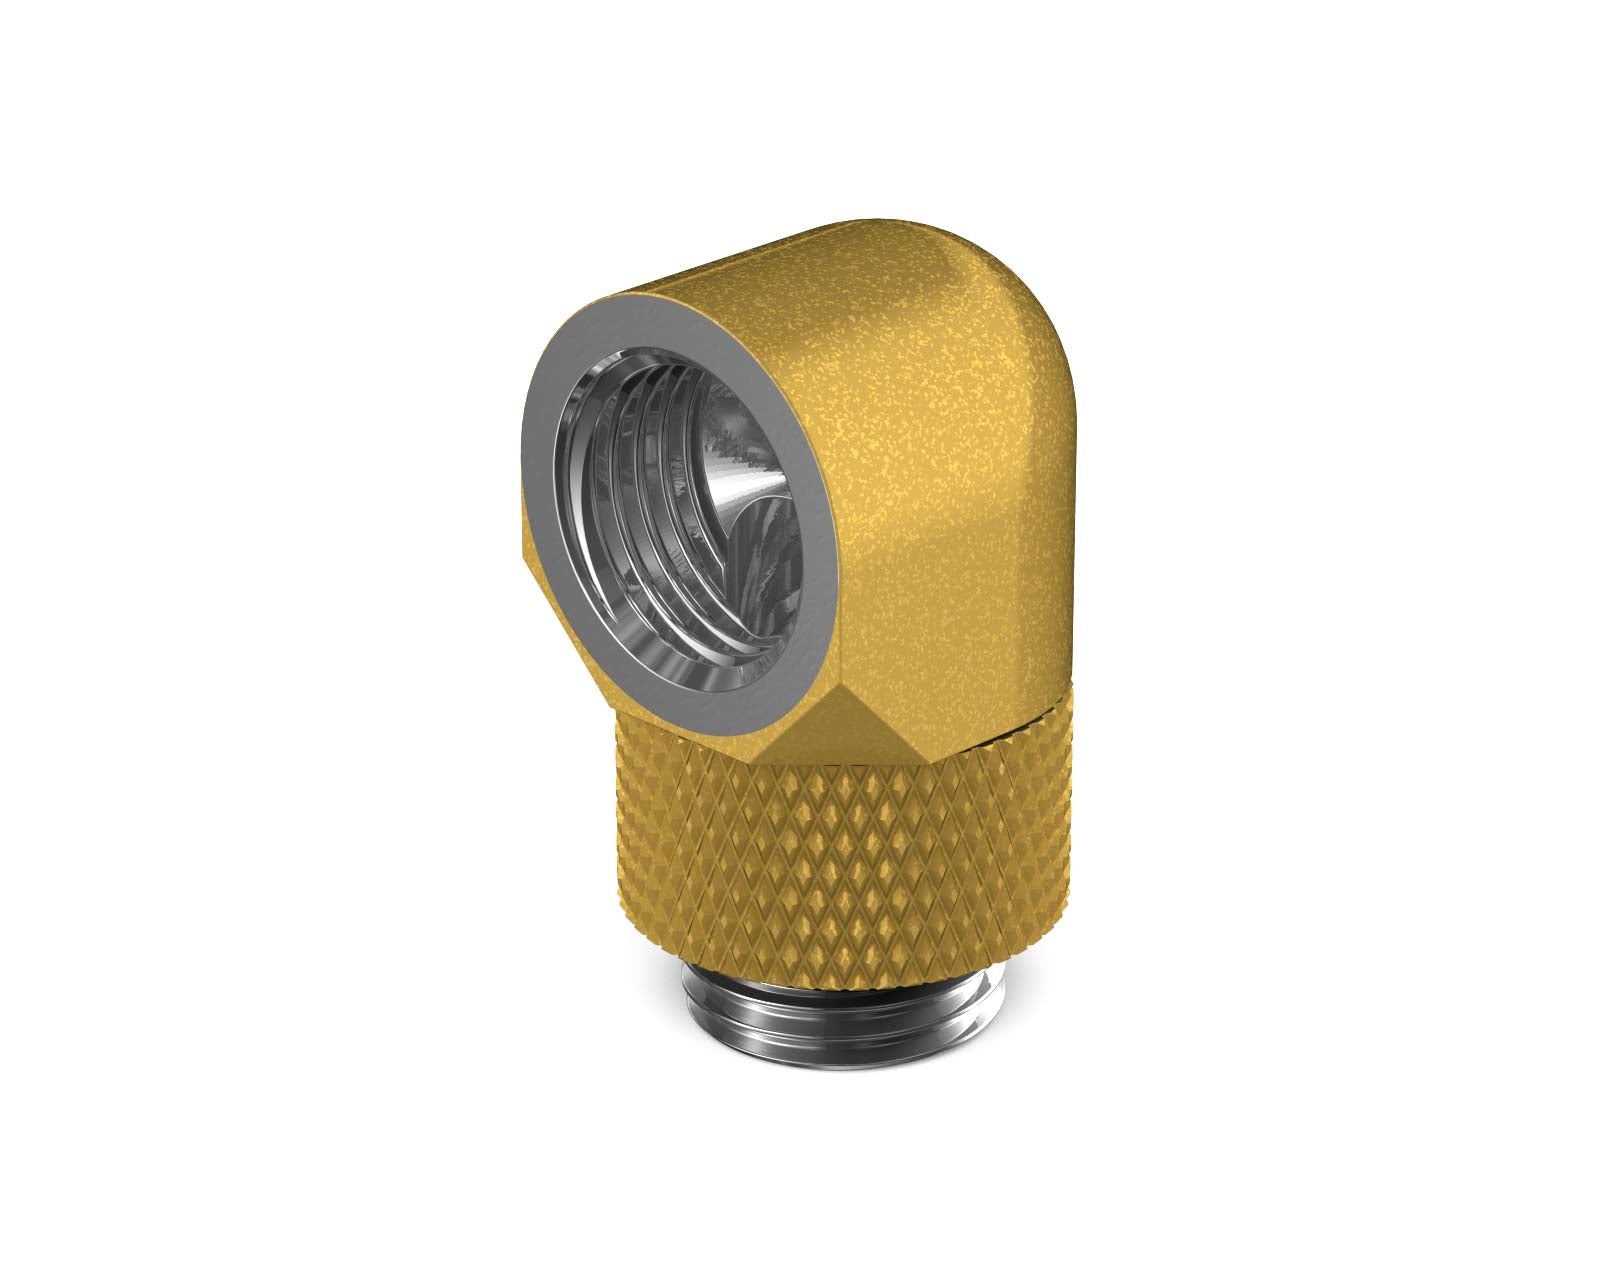 PrimoChill Male to Female G 1/4in. 90 Degree SX Rotary Elbow Fitting - PrimoChill - KEEPING IT COOL Gold